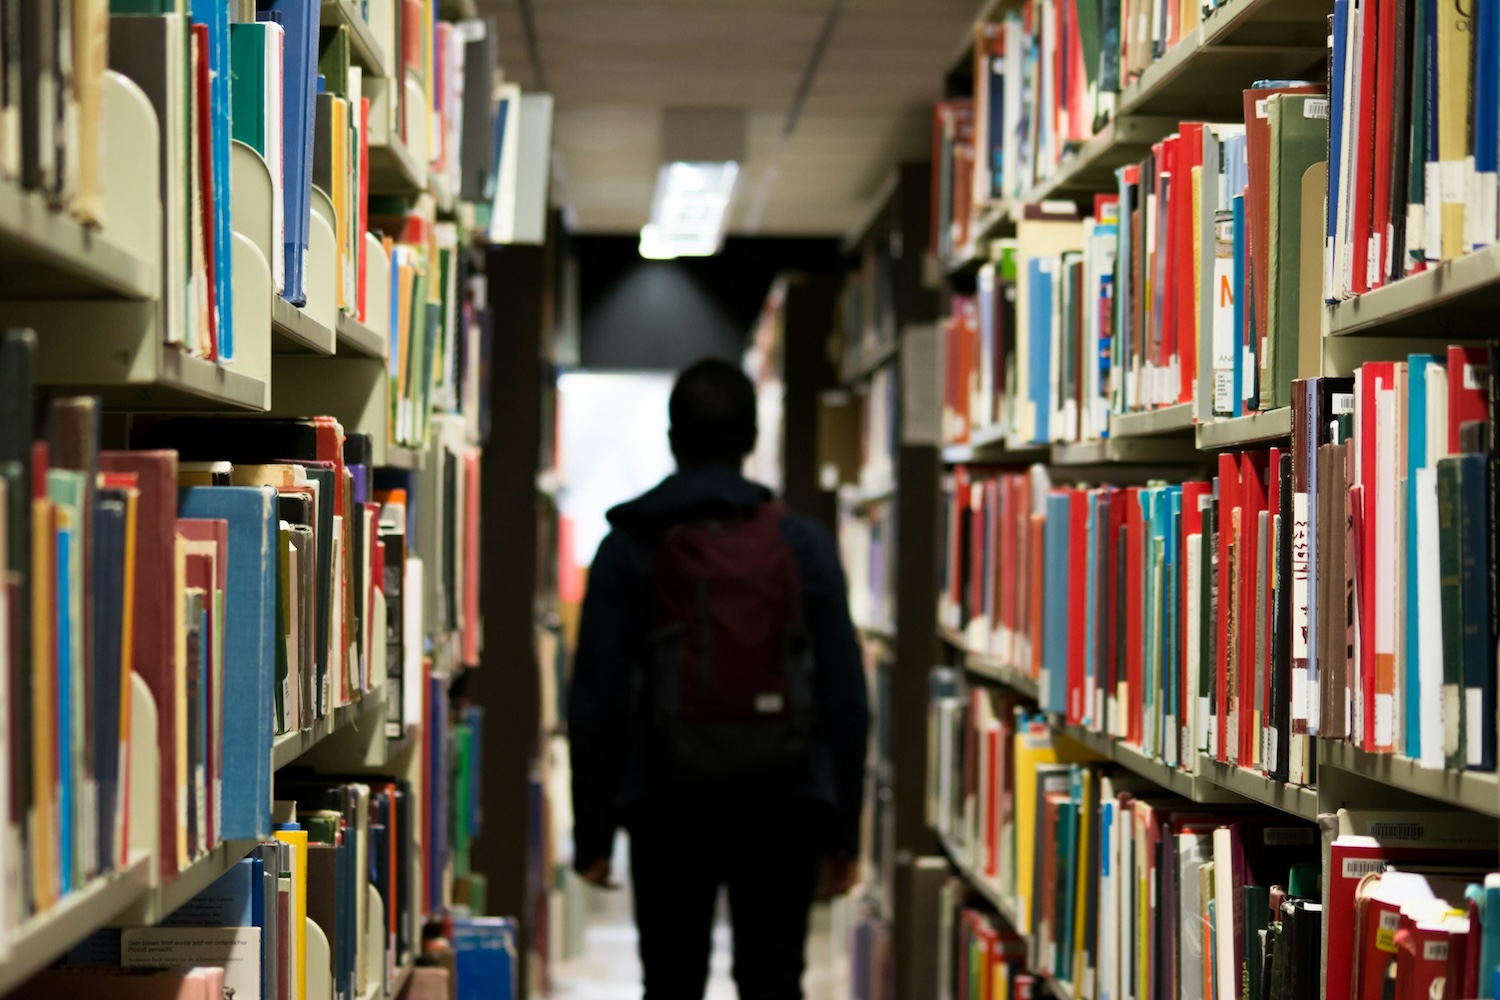 Furthering Your Education: Top Resources for Going Back to Grad School After Working